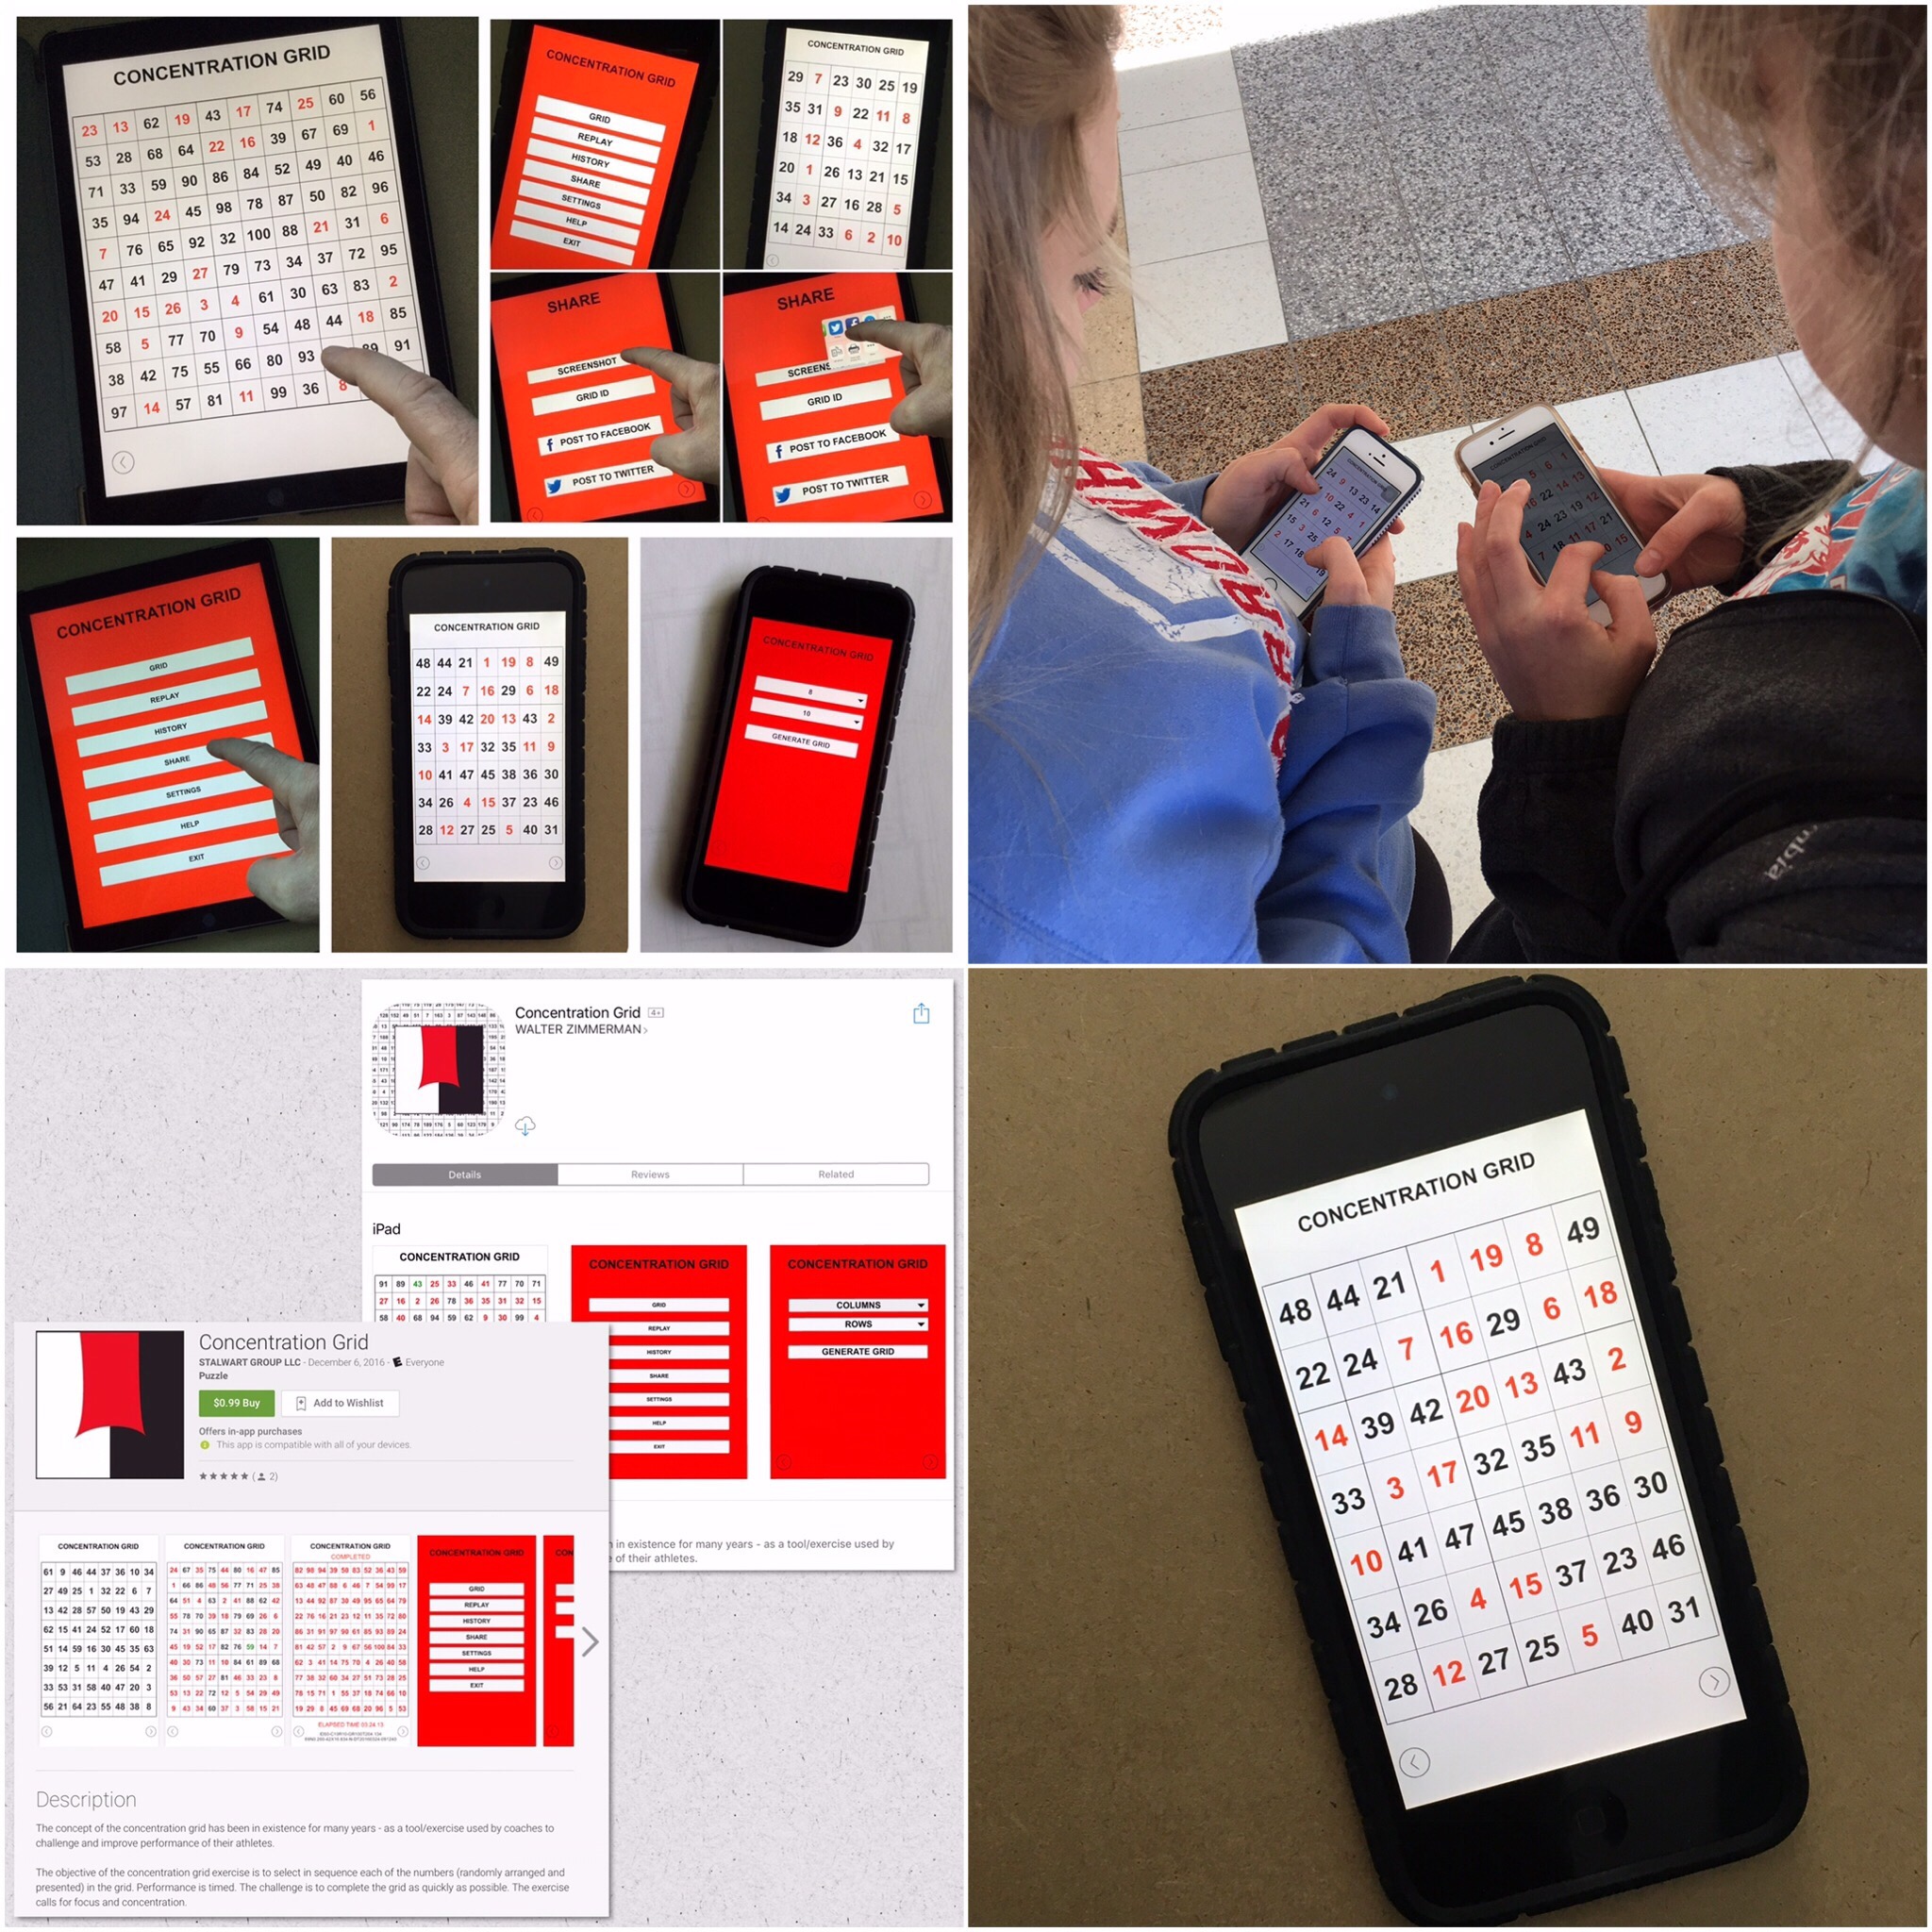 Concentration Grid is a web/mobile device app implementation of a mental skills training exercise for students, athletes, coaches, sports performance/psychology staff, trainers, teachers, parents, etc. Use concentration grids a/k/a mental focus grids with student-athletes as a tool for assessment, development, practice/exercise of attention skills ... and for competitive challenge and fun. Generate grids in varying sizes of between 3 and 14 columns/rows - small grids test speed/dexterity ... larger grids exercise focus/attention skills. Convenient gameplay/replay.  History tracking (time/performance data). Share feature is integrated with social media. Post and track best gridtimes at the leaderboard. Make self-development a daily habit. #concentrationgrid #challengeyourself - concentrationgrid.com - concentrationgrid.net - tryconcentrationgrid.com